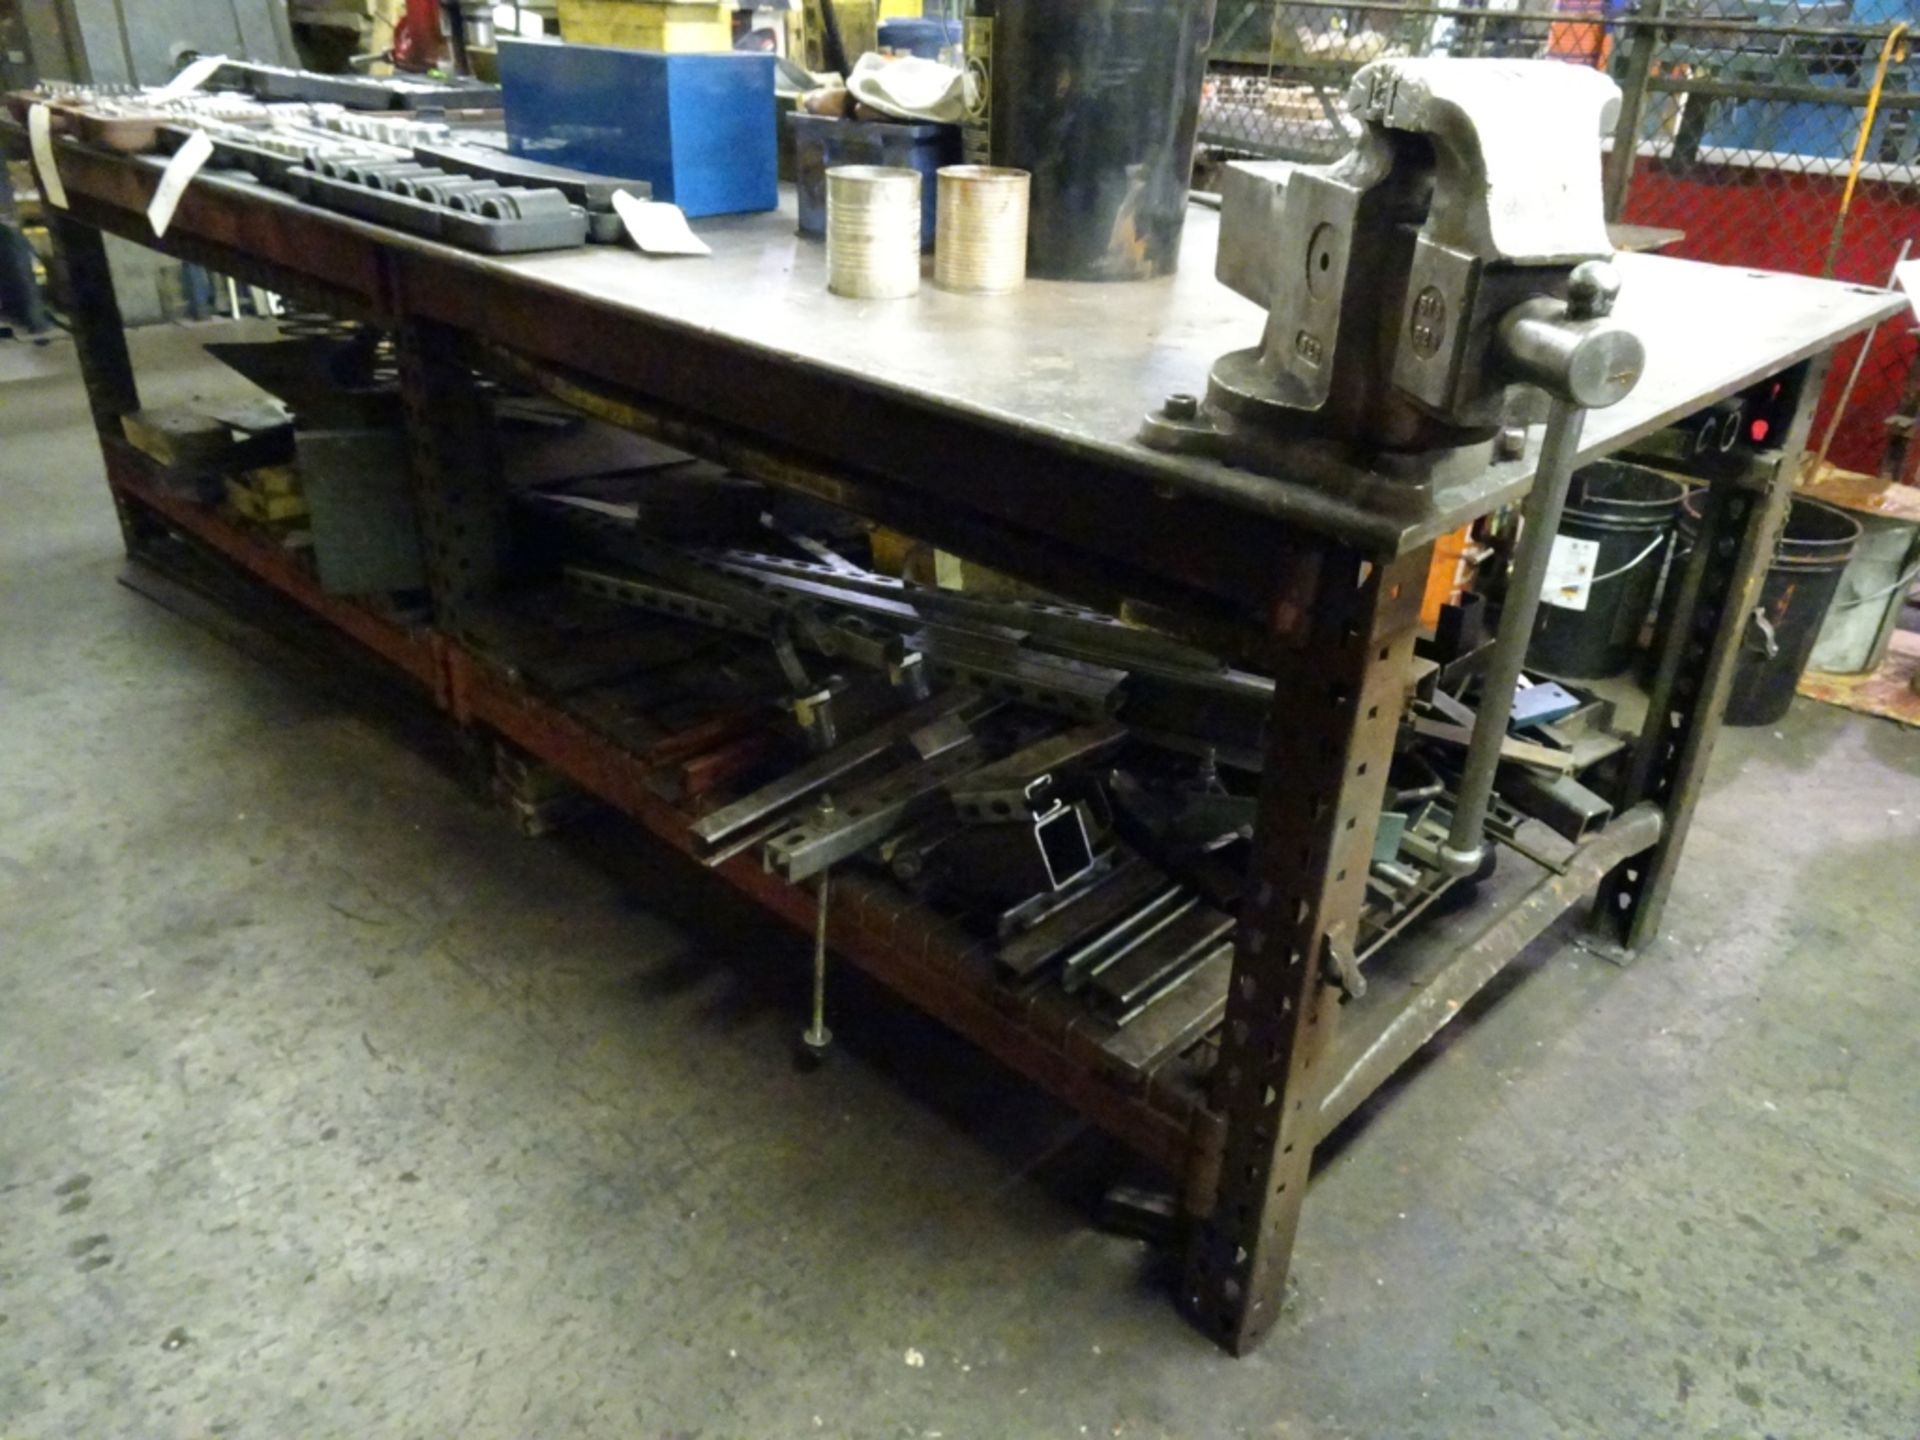 10' x 4' Custom Fabricated Welding Table w/ Vise and Misc Metals